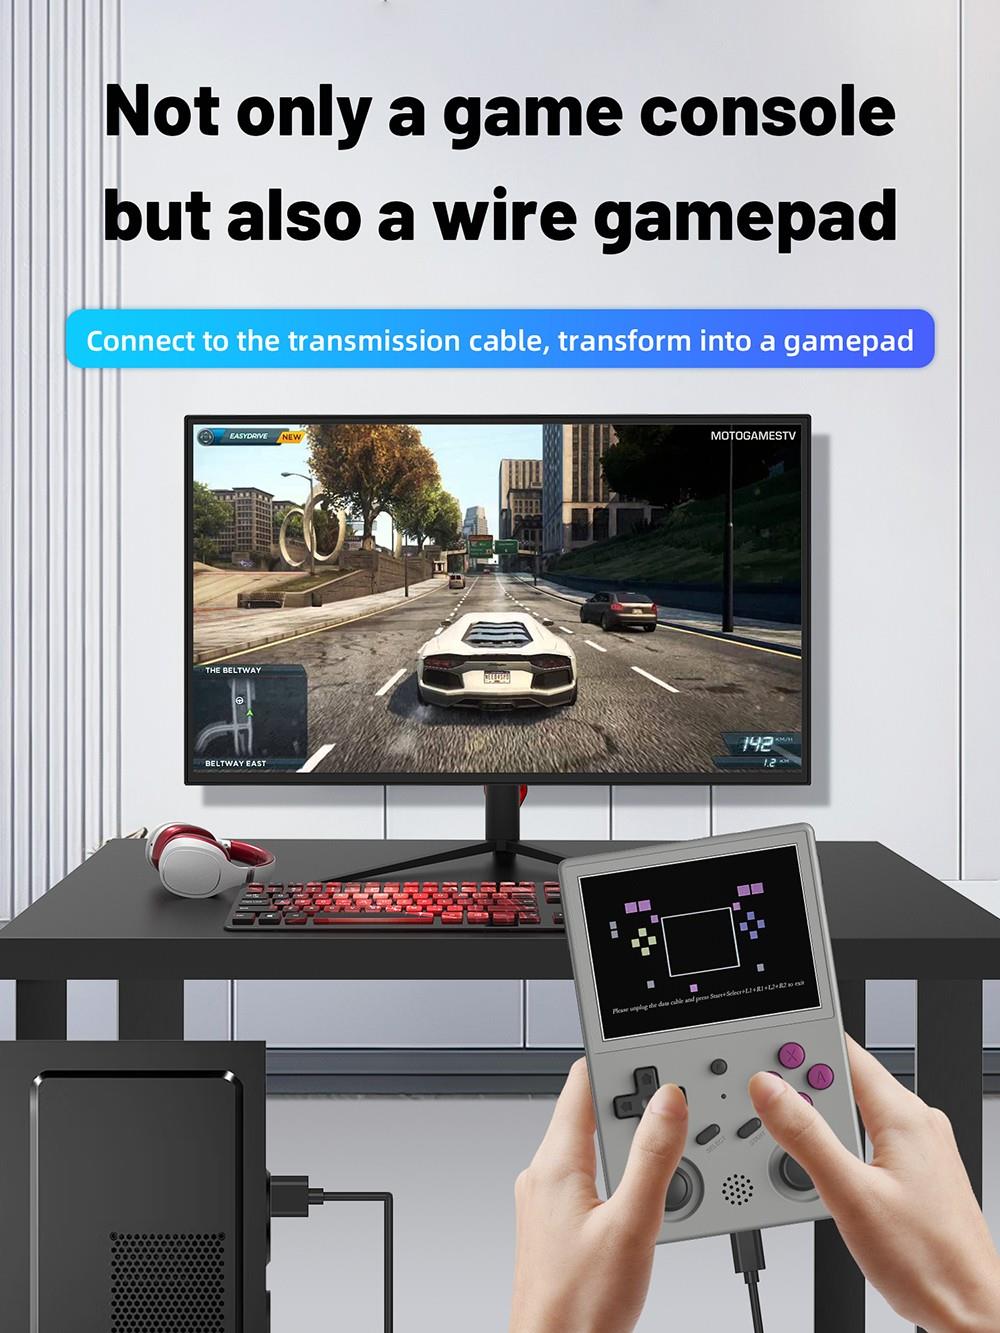 ANBERNIC RG353VS Portable Game Console Android 16GB Linux+128GB Game TF Card 3.5'' IPS Retro WiFi Bluetooth - Grey